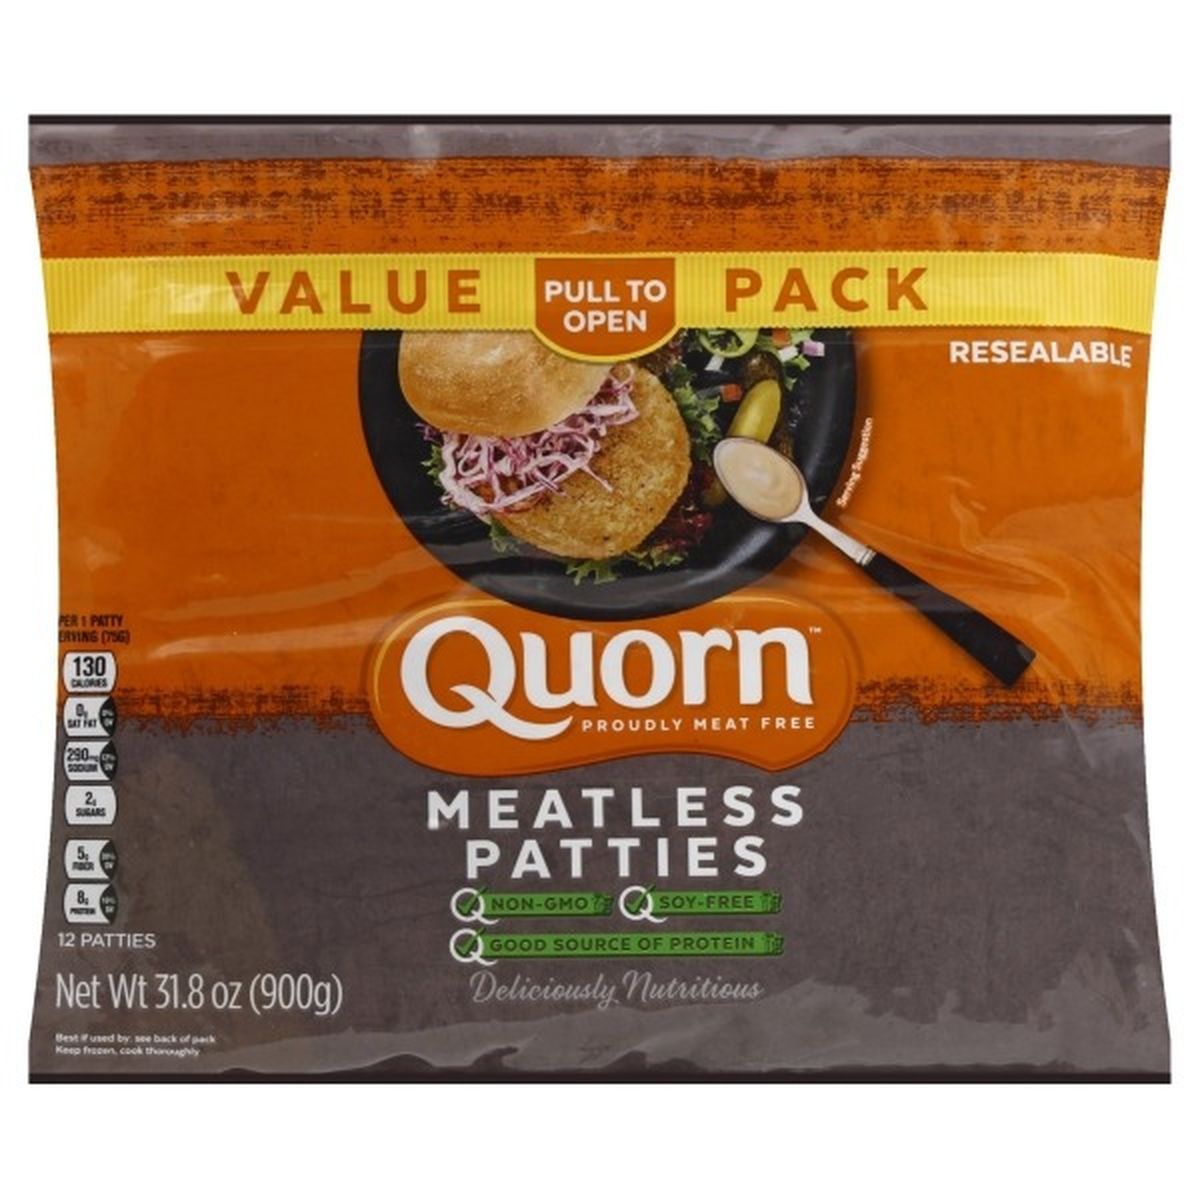 Calories in Quorn Patties, Meatless, Value Pack